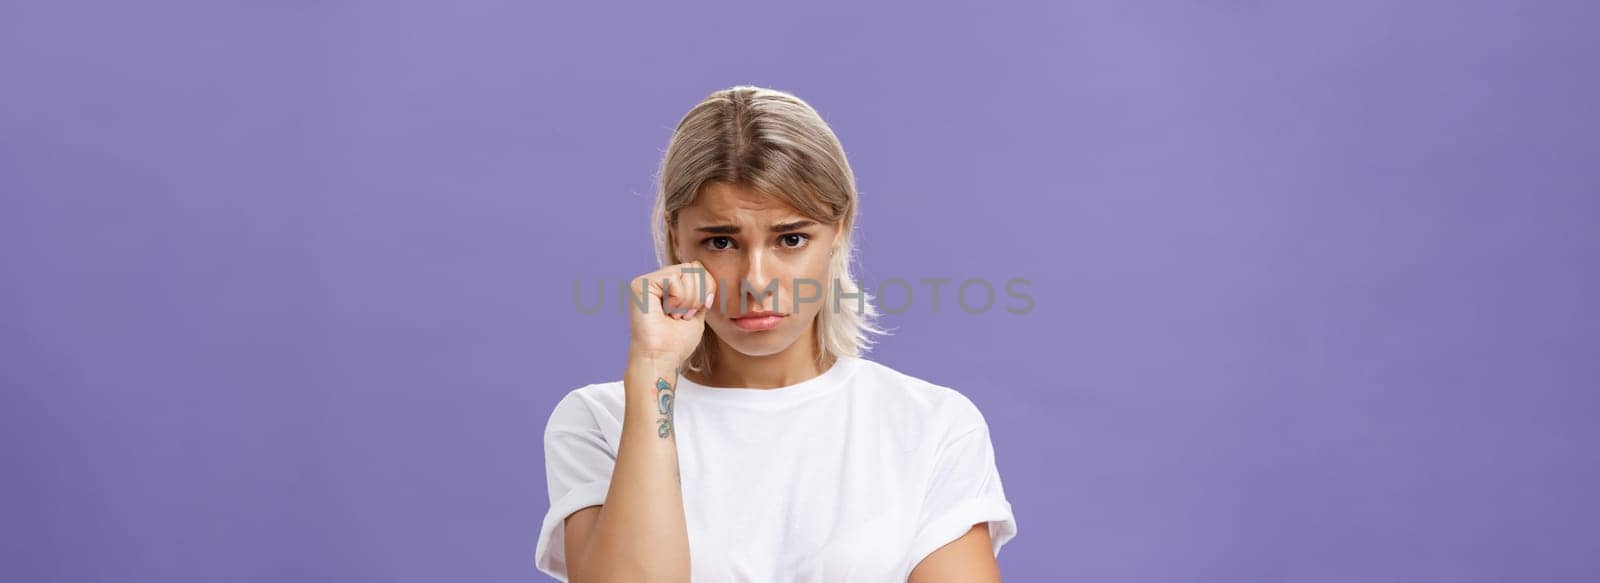 Studio shot of offended sad and timid silly woman with blond hairstyle frowning looking from under forehead holding fist near eye as if whiping teardrop being upset over purple background. Emotions concept